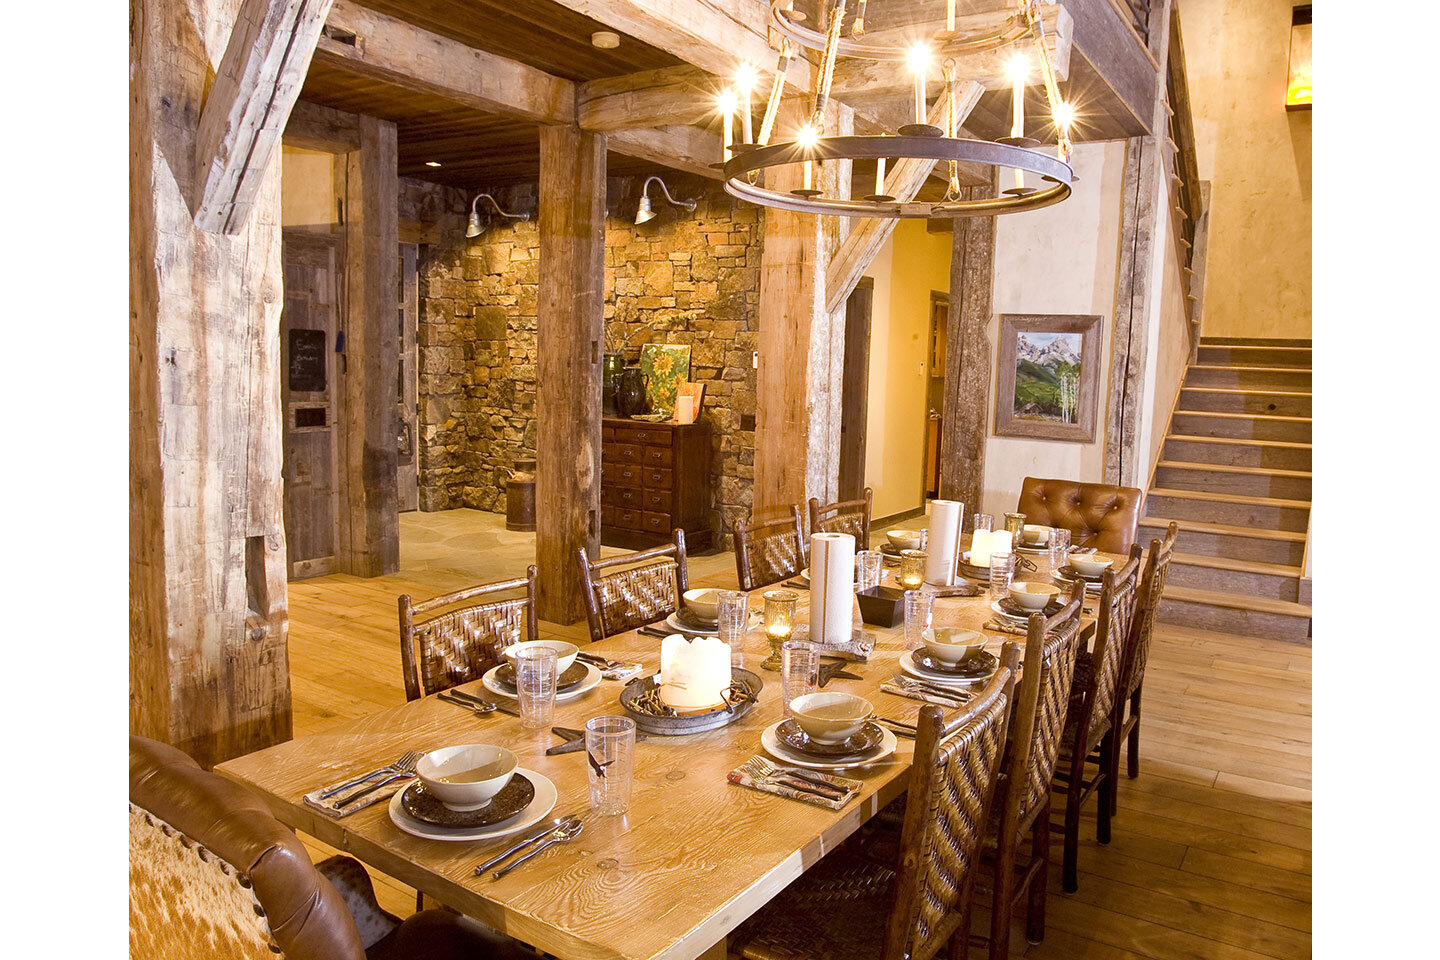 Rustic dining room with table set for festive diner